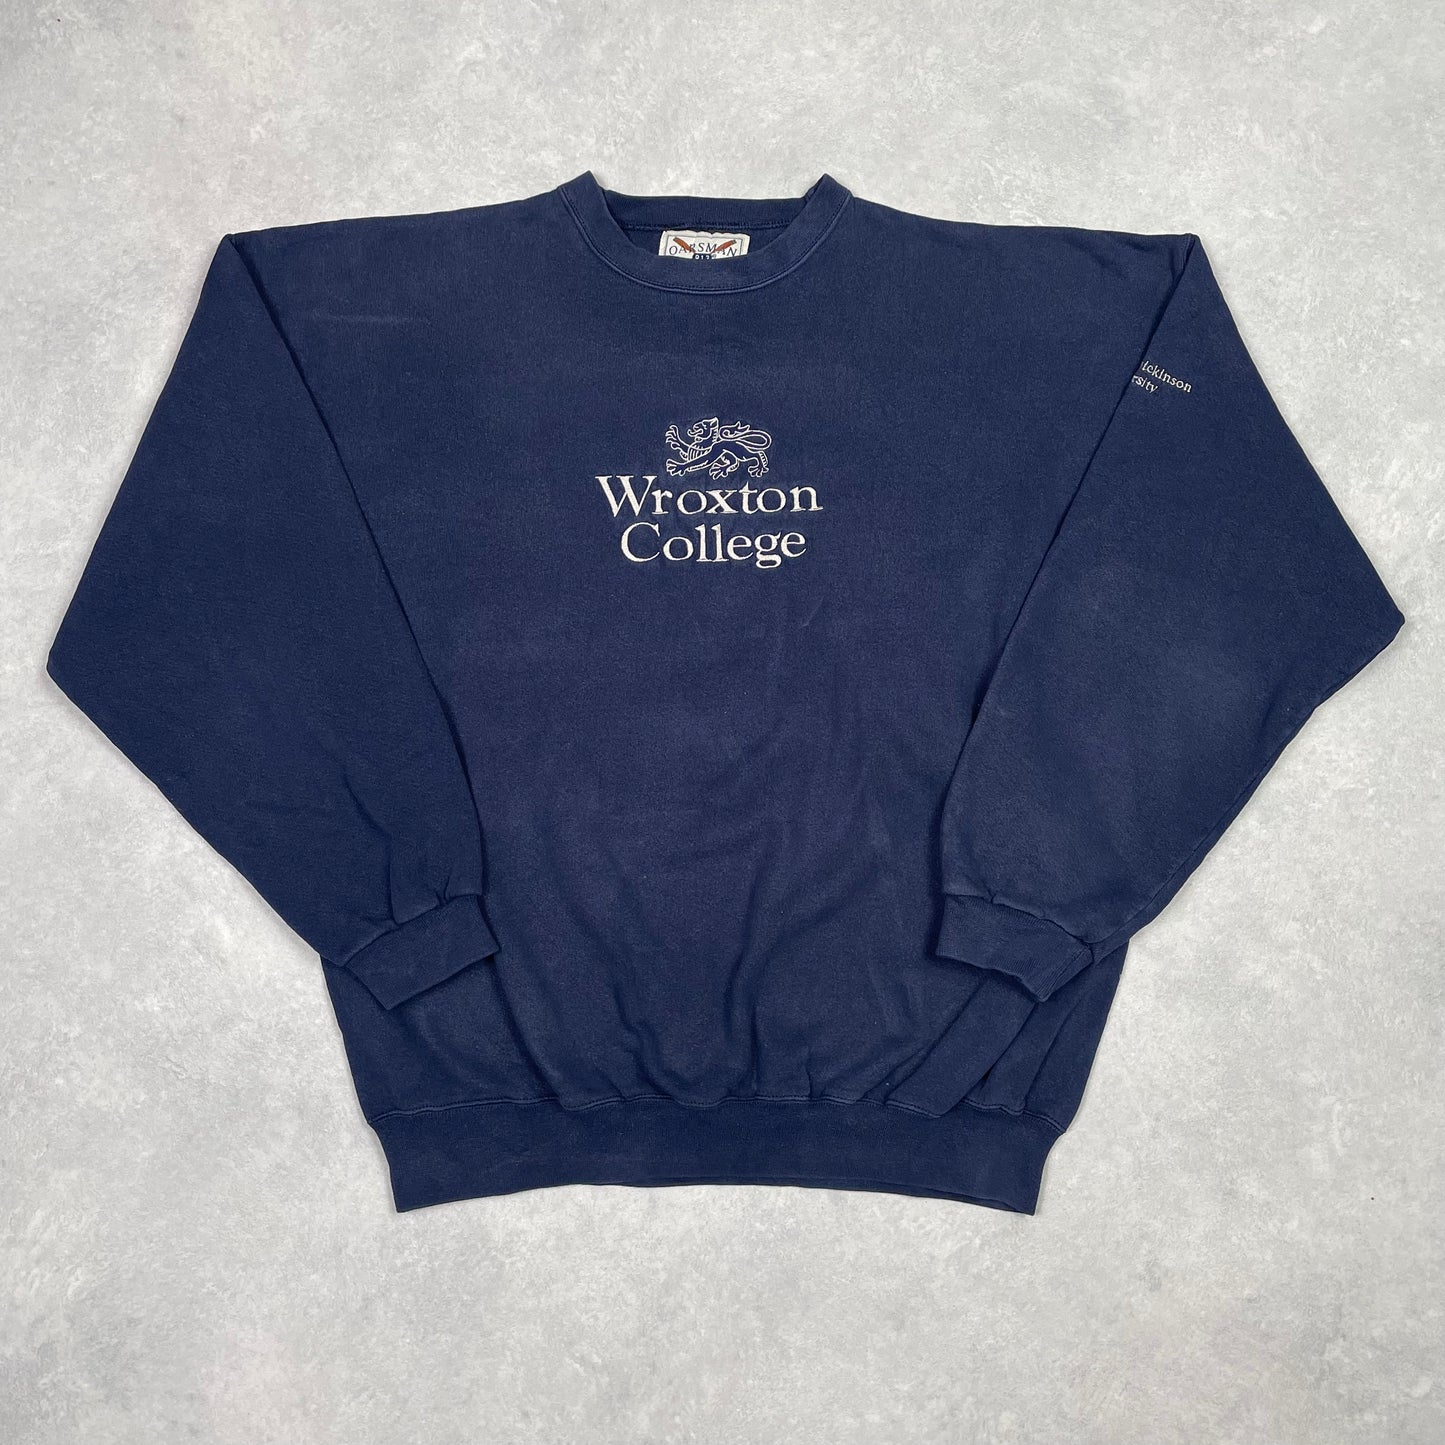 Vintage Sweater ”Wroxton College” Oarsman Navy Made in USA